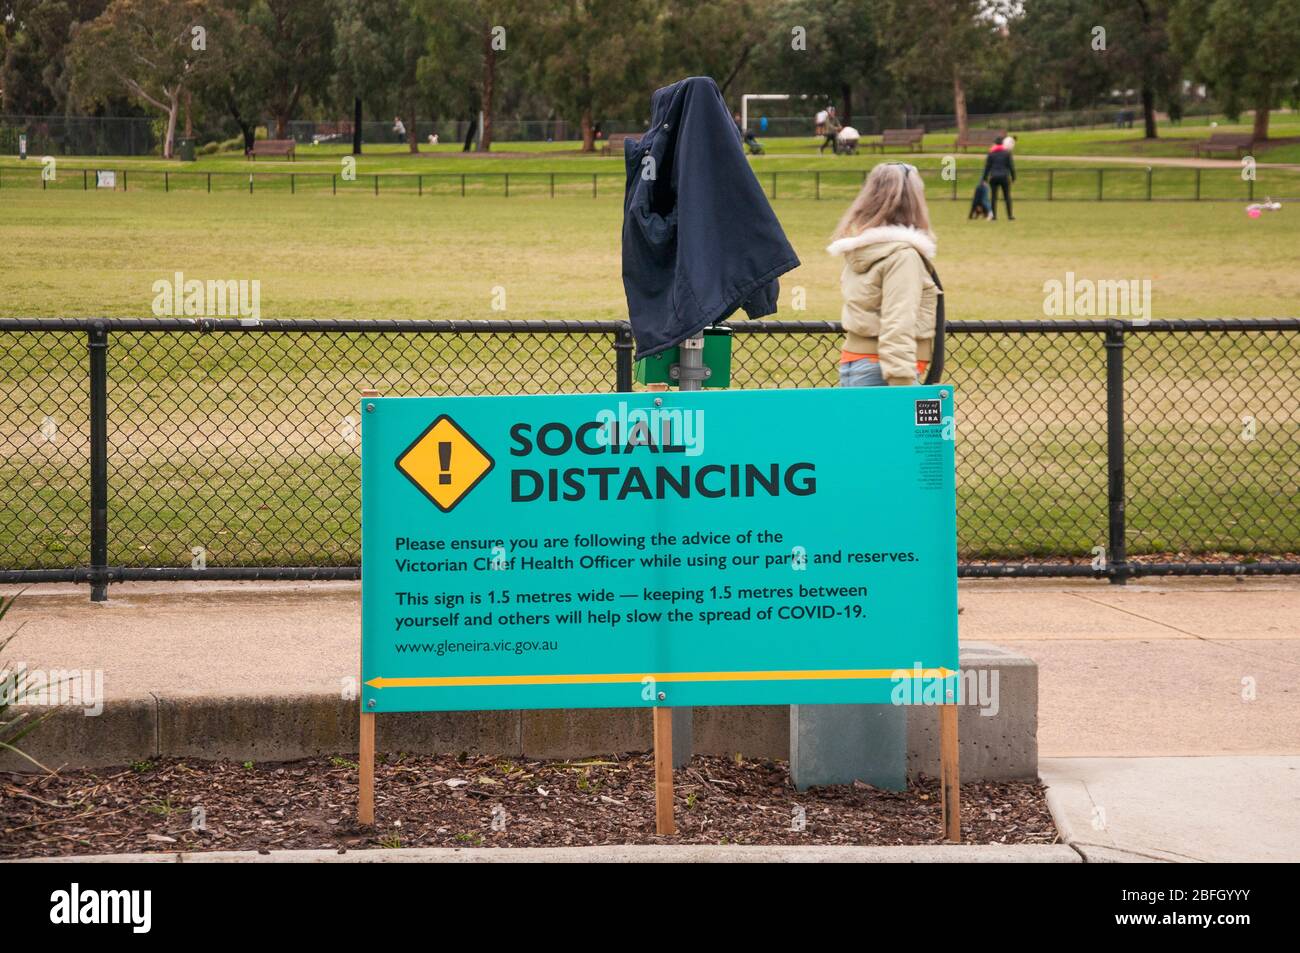 Local government notice in a suburban park promotes social distancing during the COVID-19 pandemic, Melbourne, Australia Stock Photo